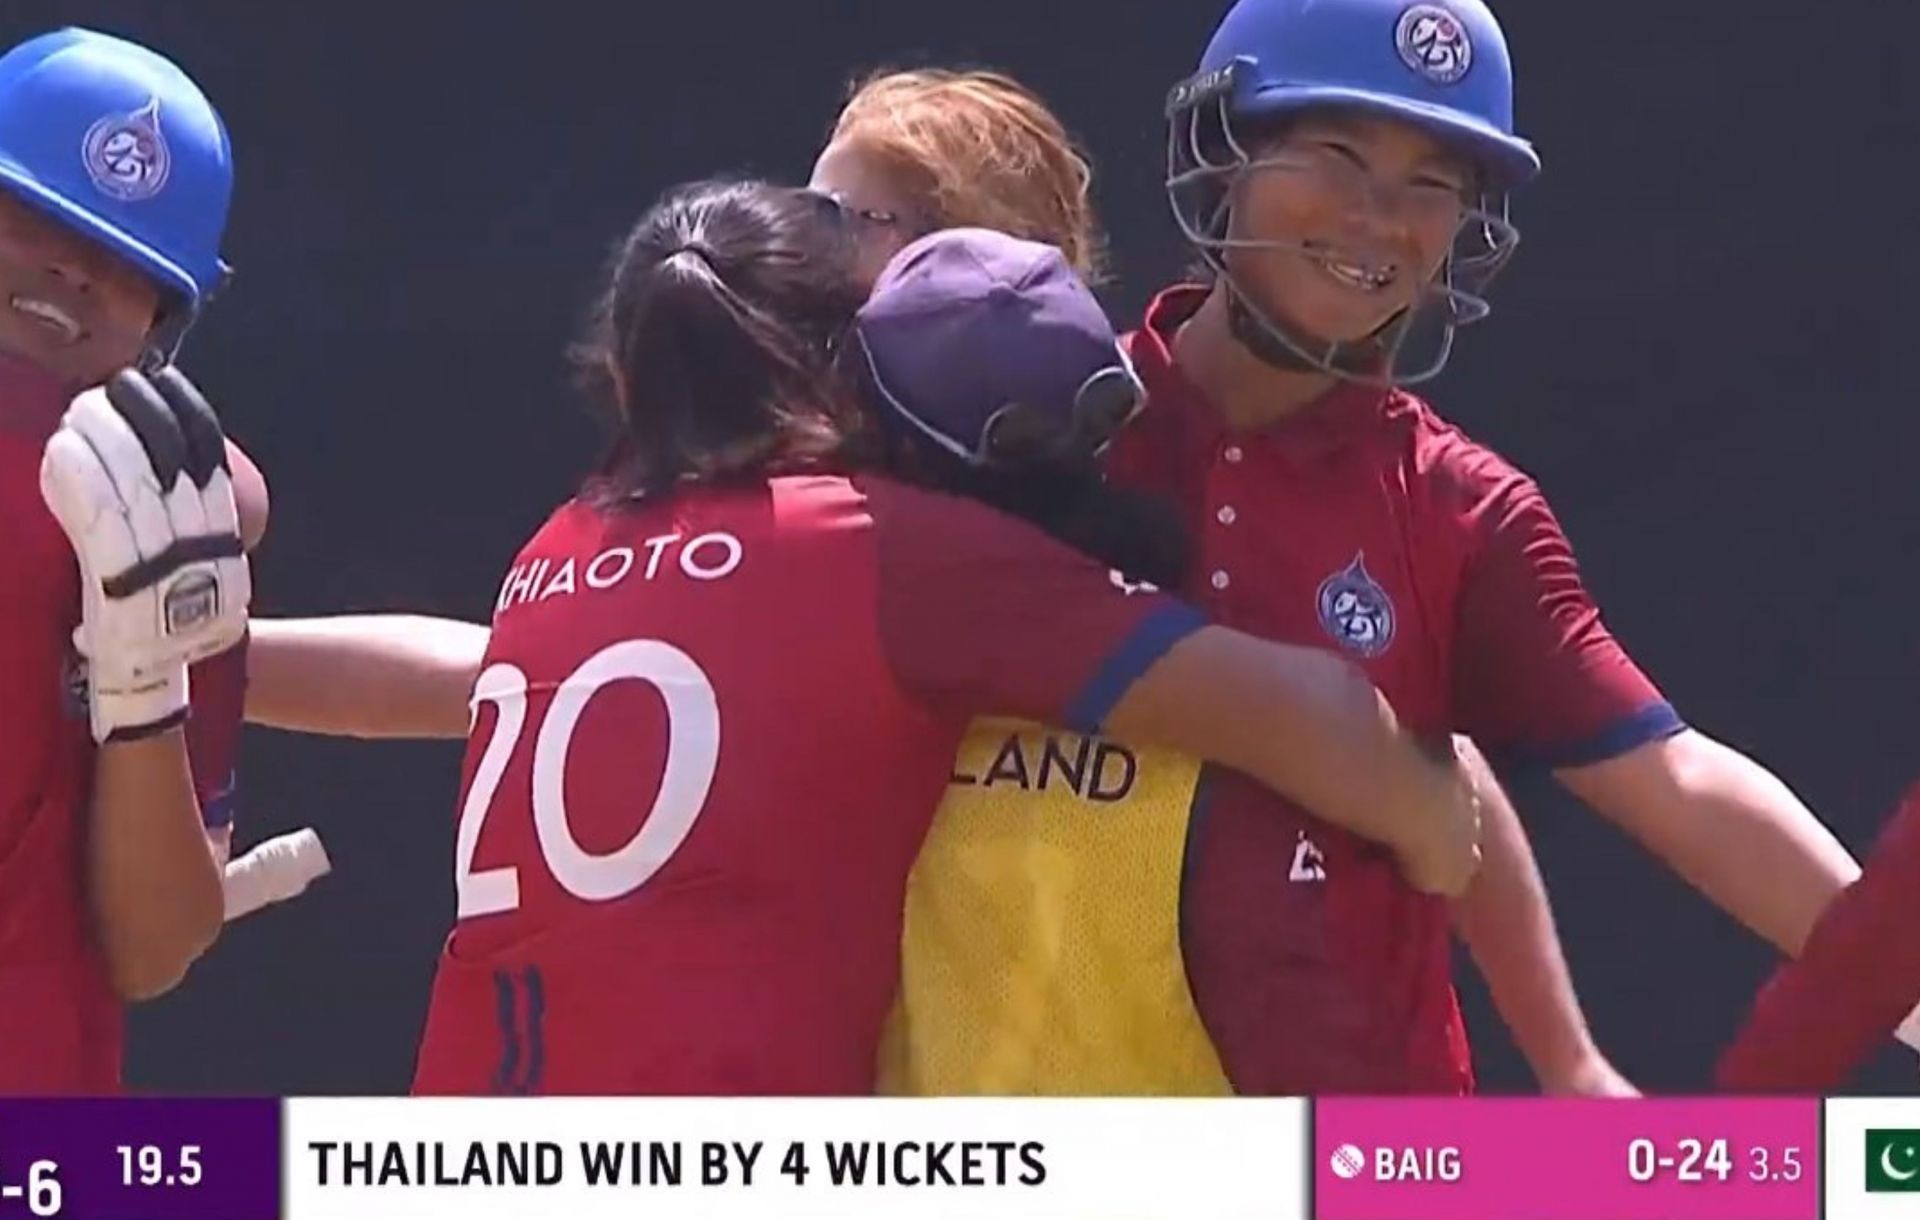 Thailand team celebrating after the win (Credits: Hotstar)